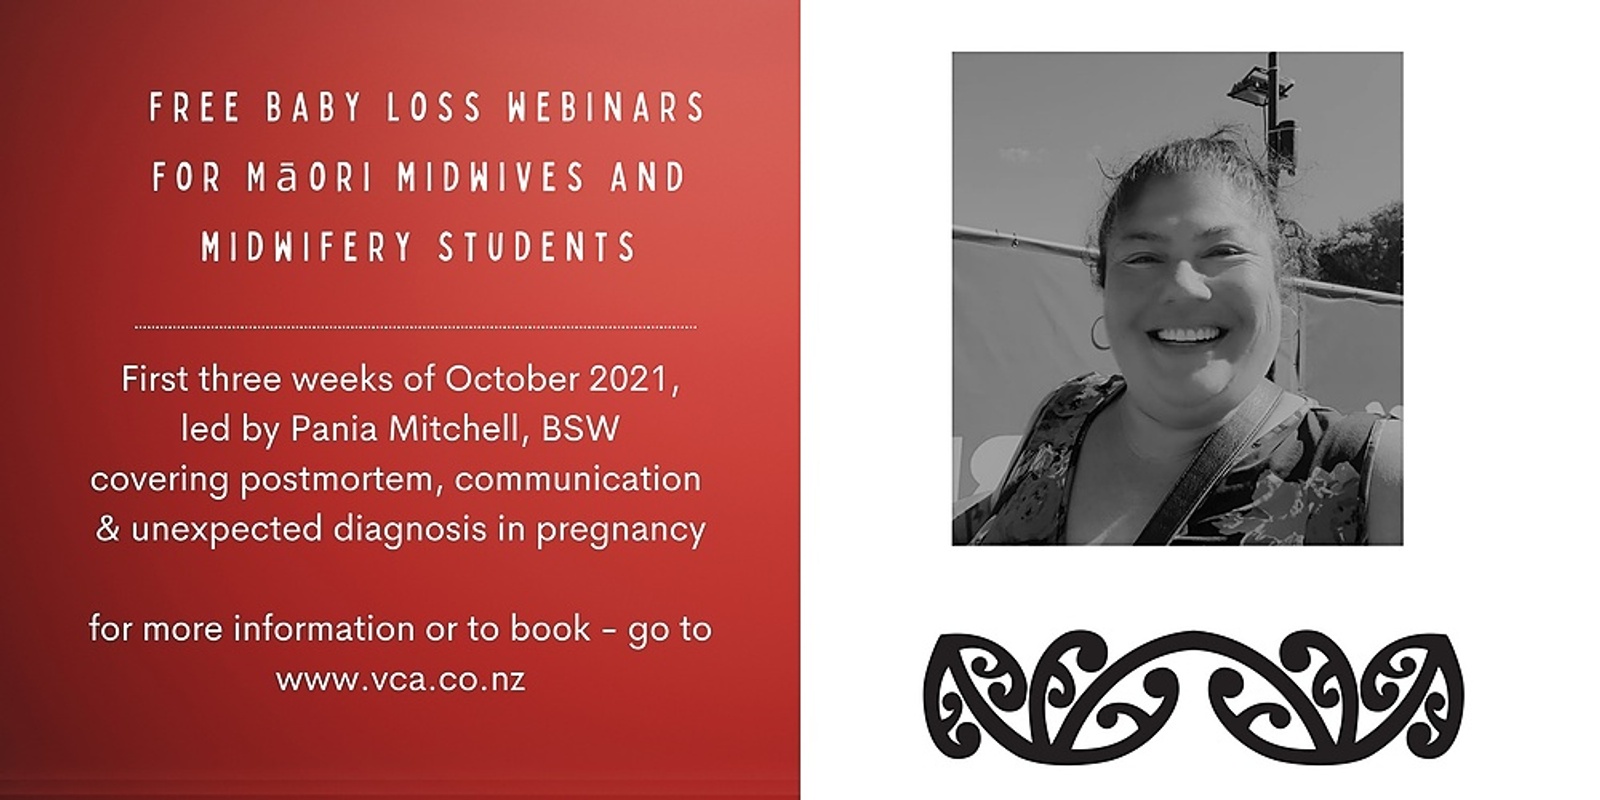 Banner image for Baby Loss Webinars for Māori Midwives and Students